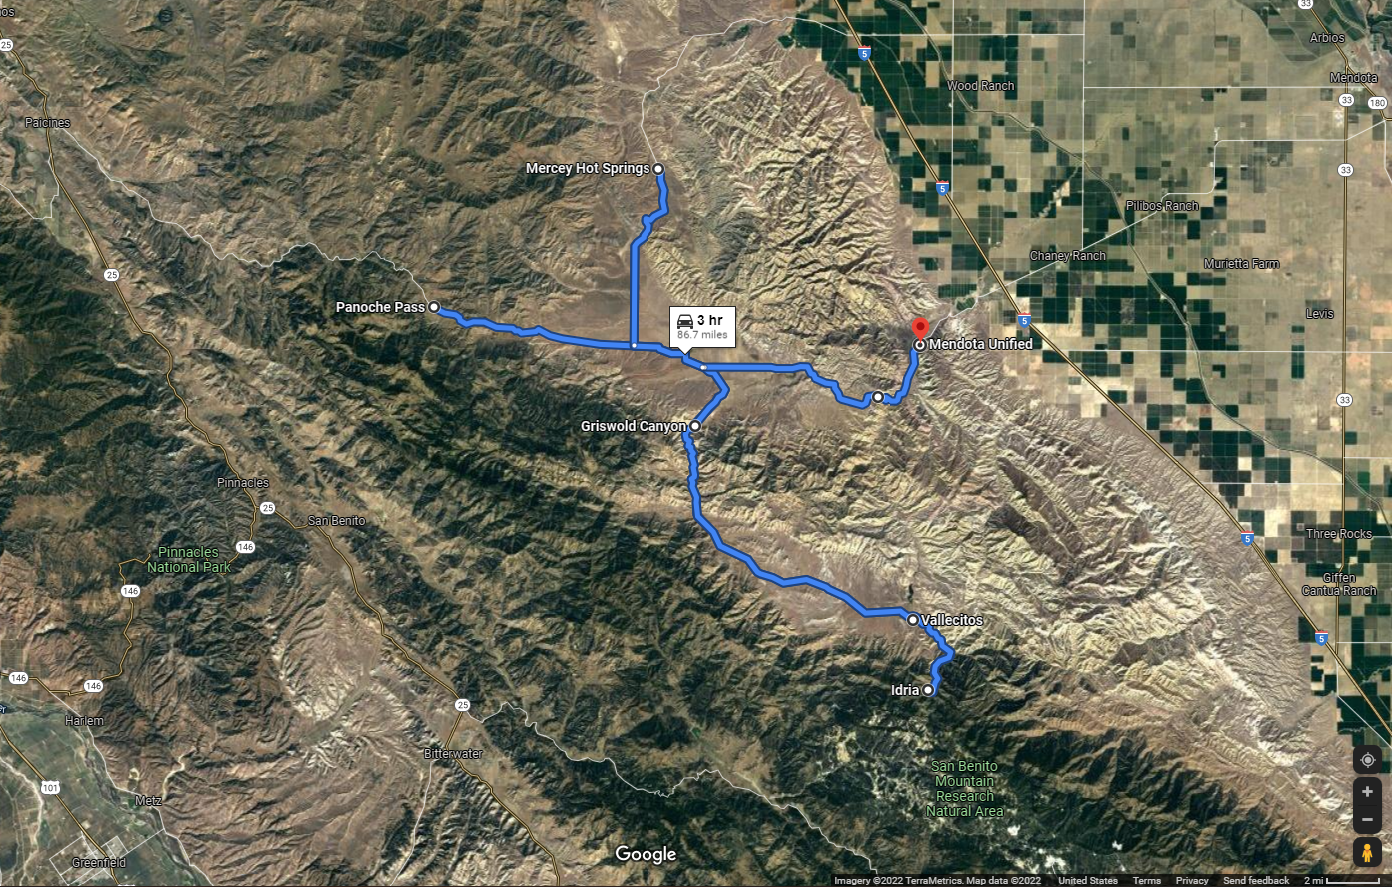 Map showing route Seth Adams and Joseph Belli took through Panoche